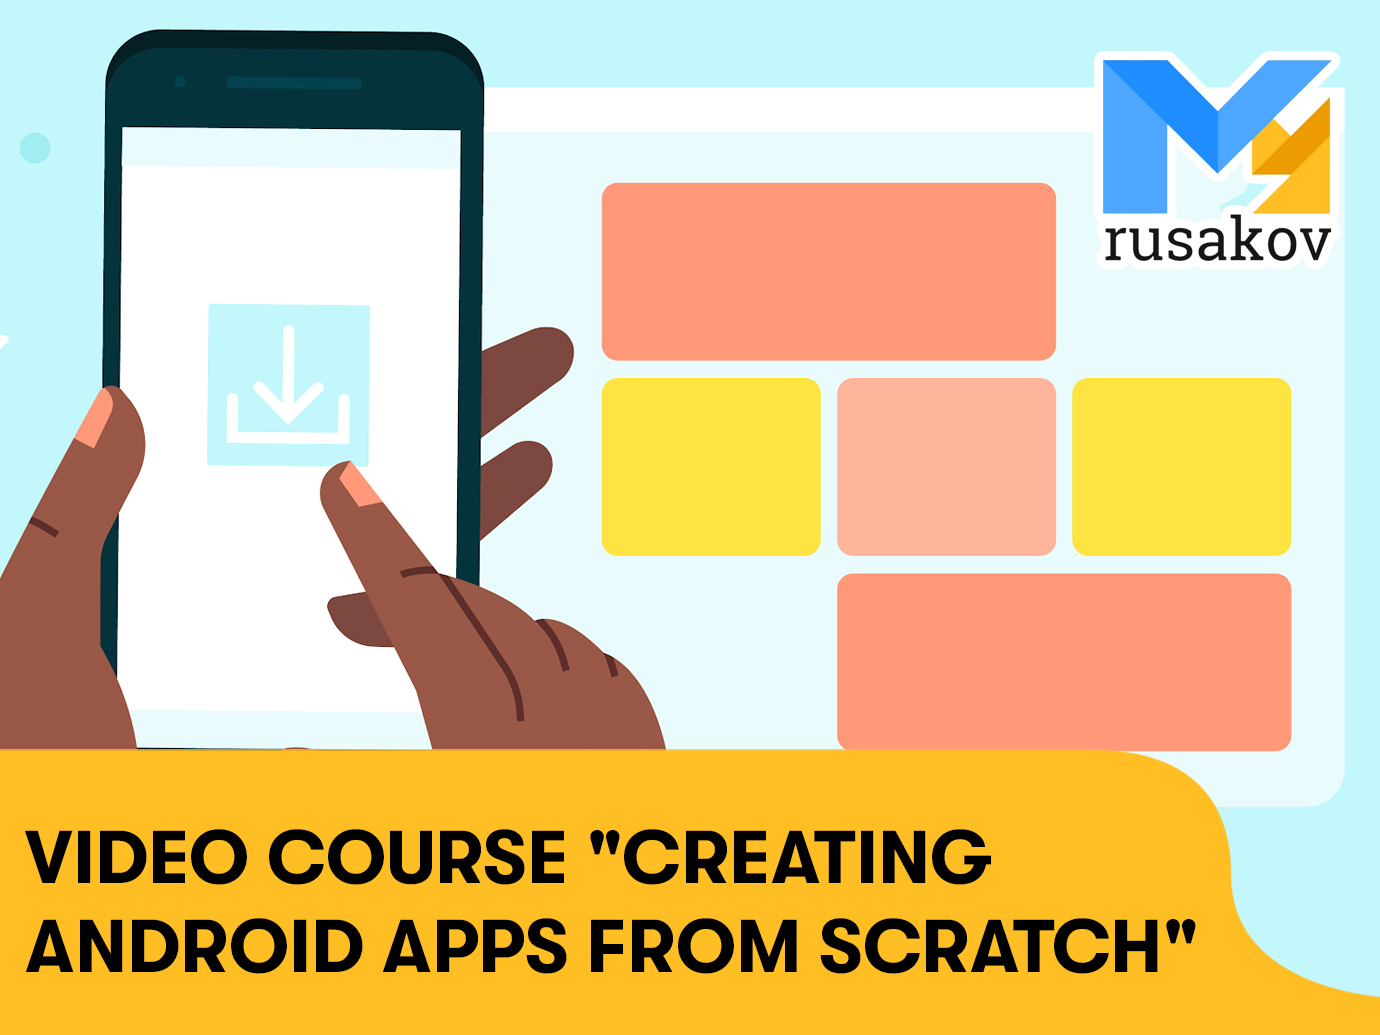 Video course “Creating Android apps from scratch“